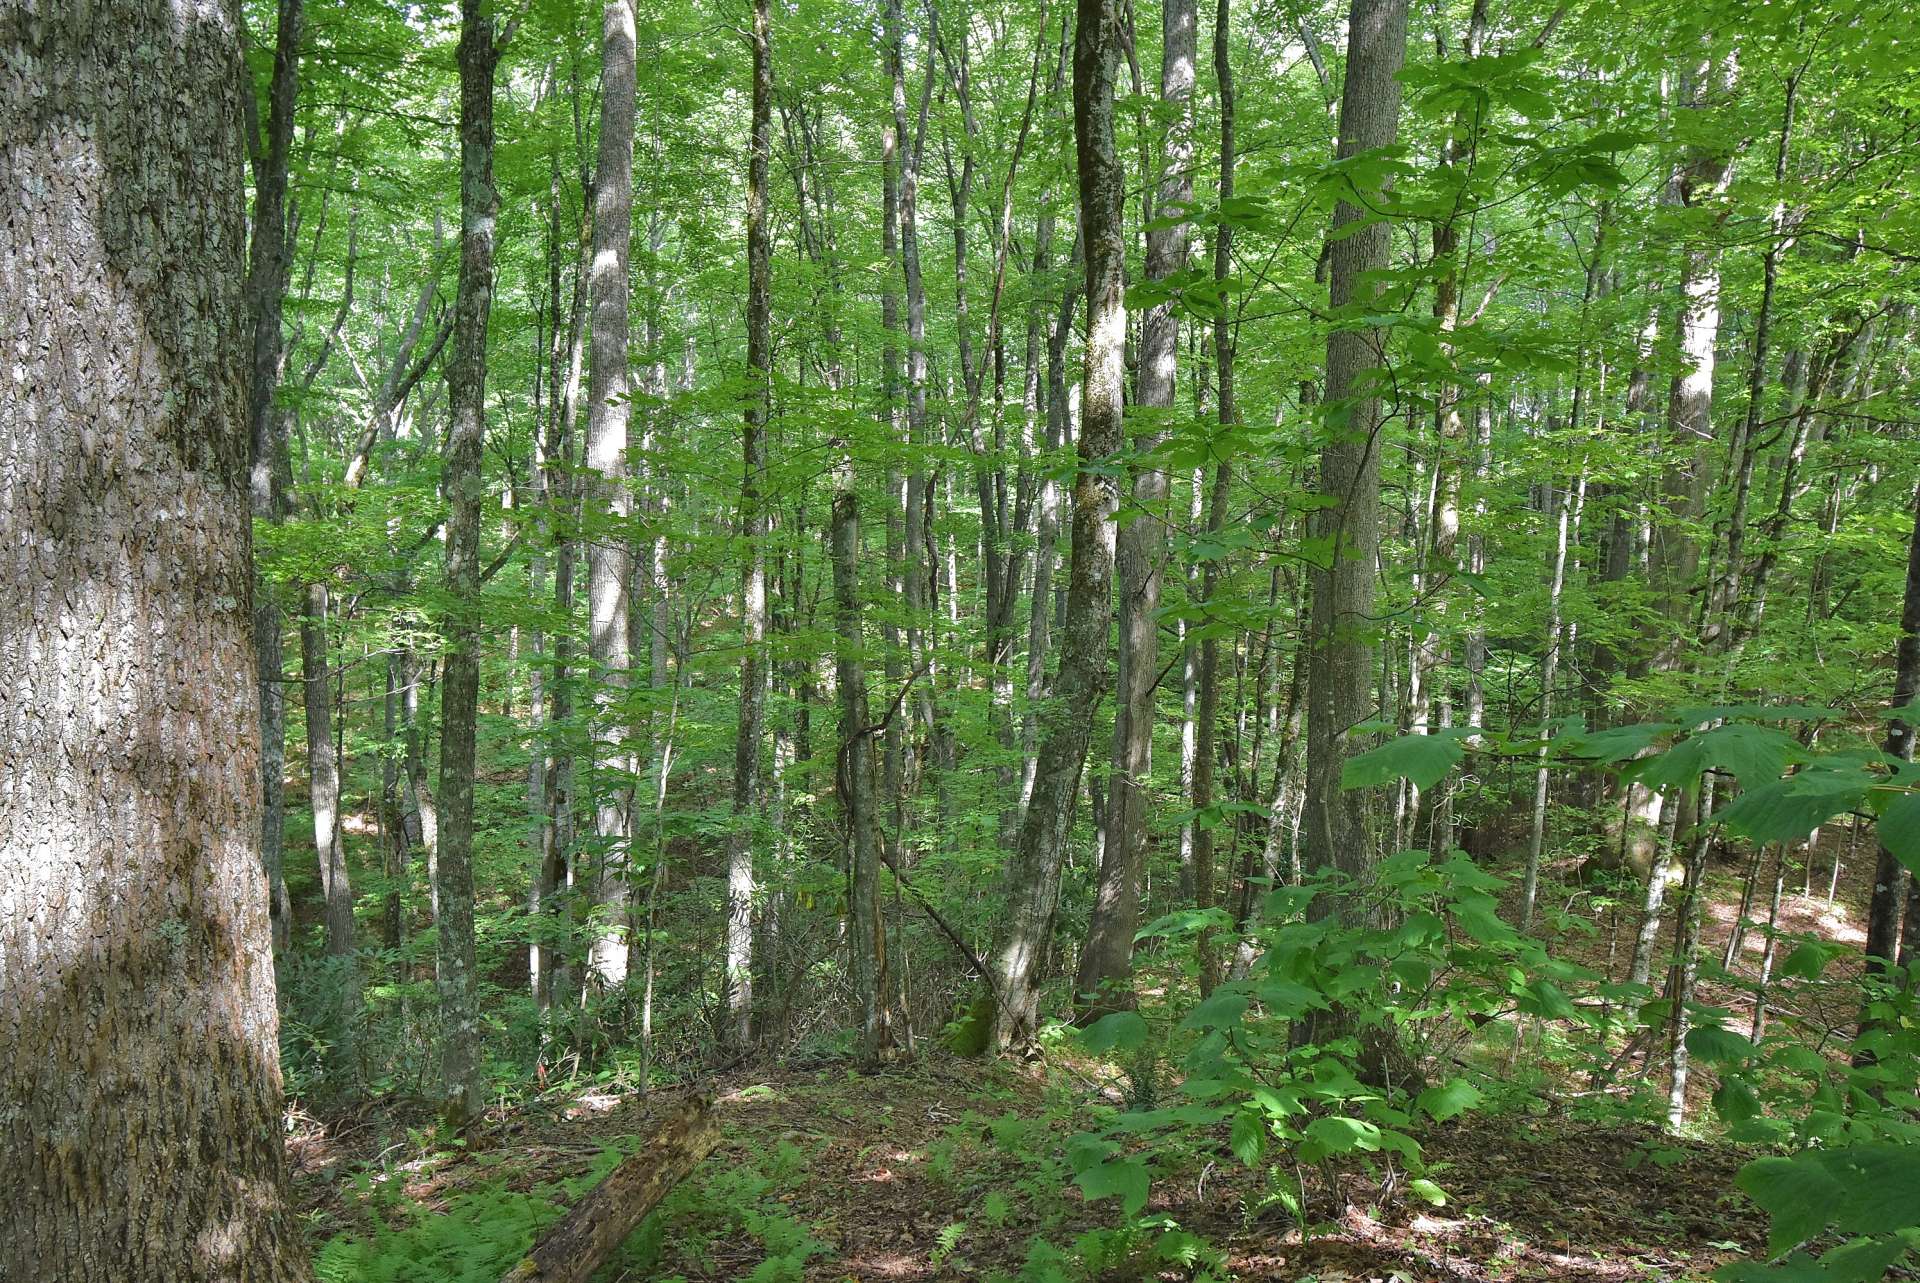 The forest creates a wonderful habitat for a diverse variety of wildlife providing a great hunting tract.